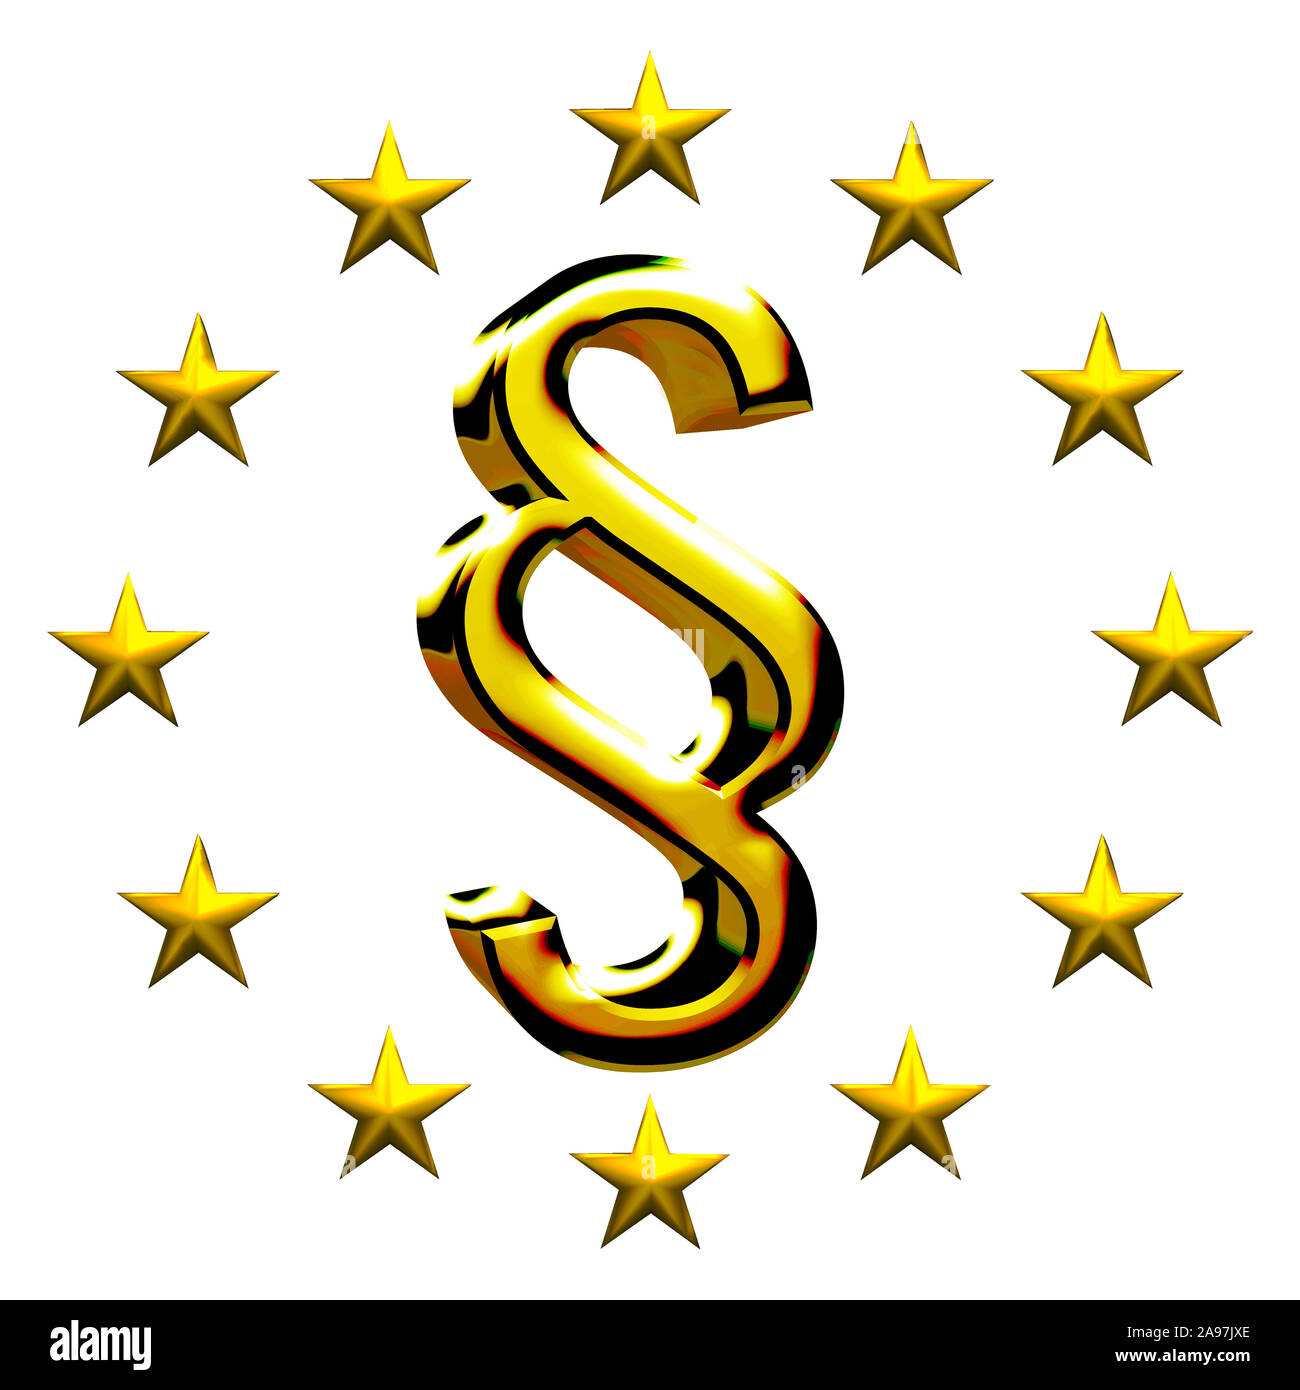 Paragraph gold with EU star circle background Stock Photo